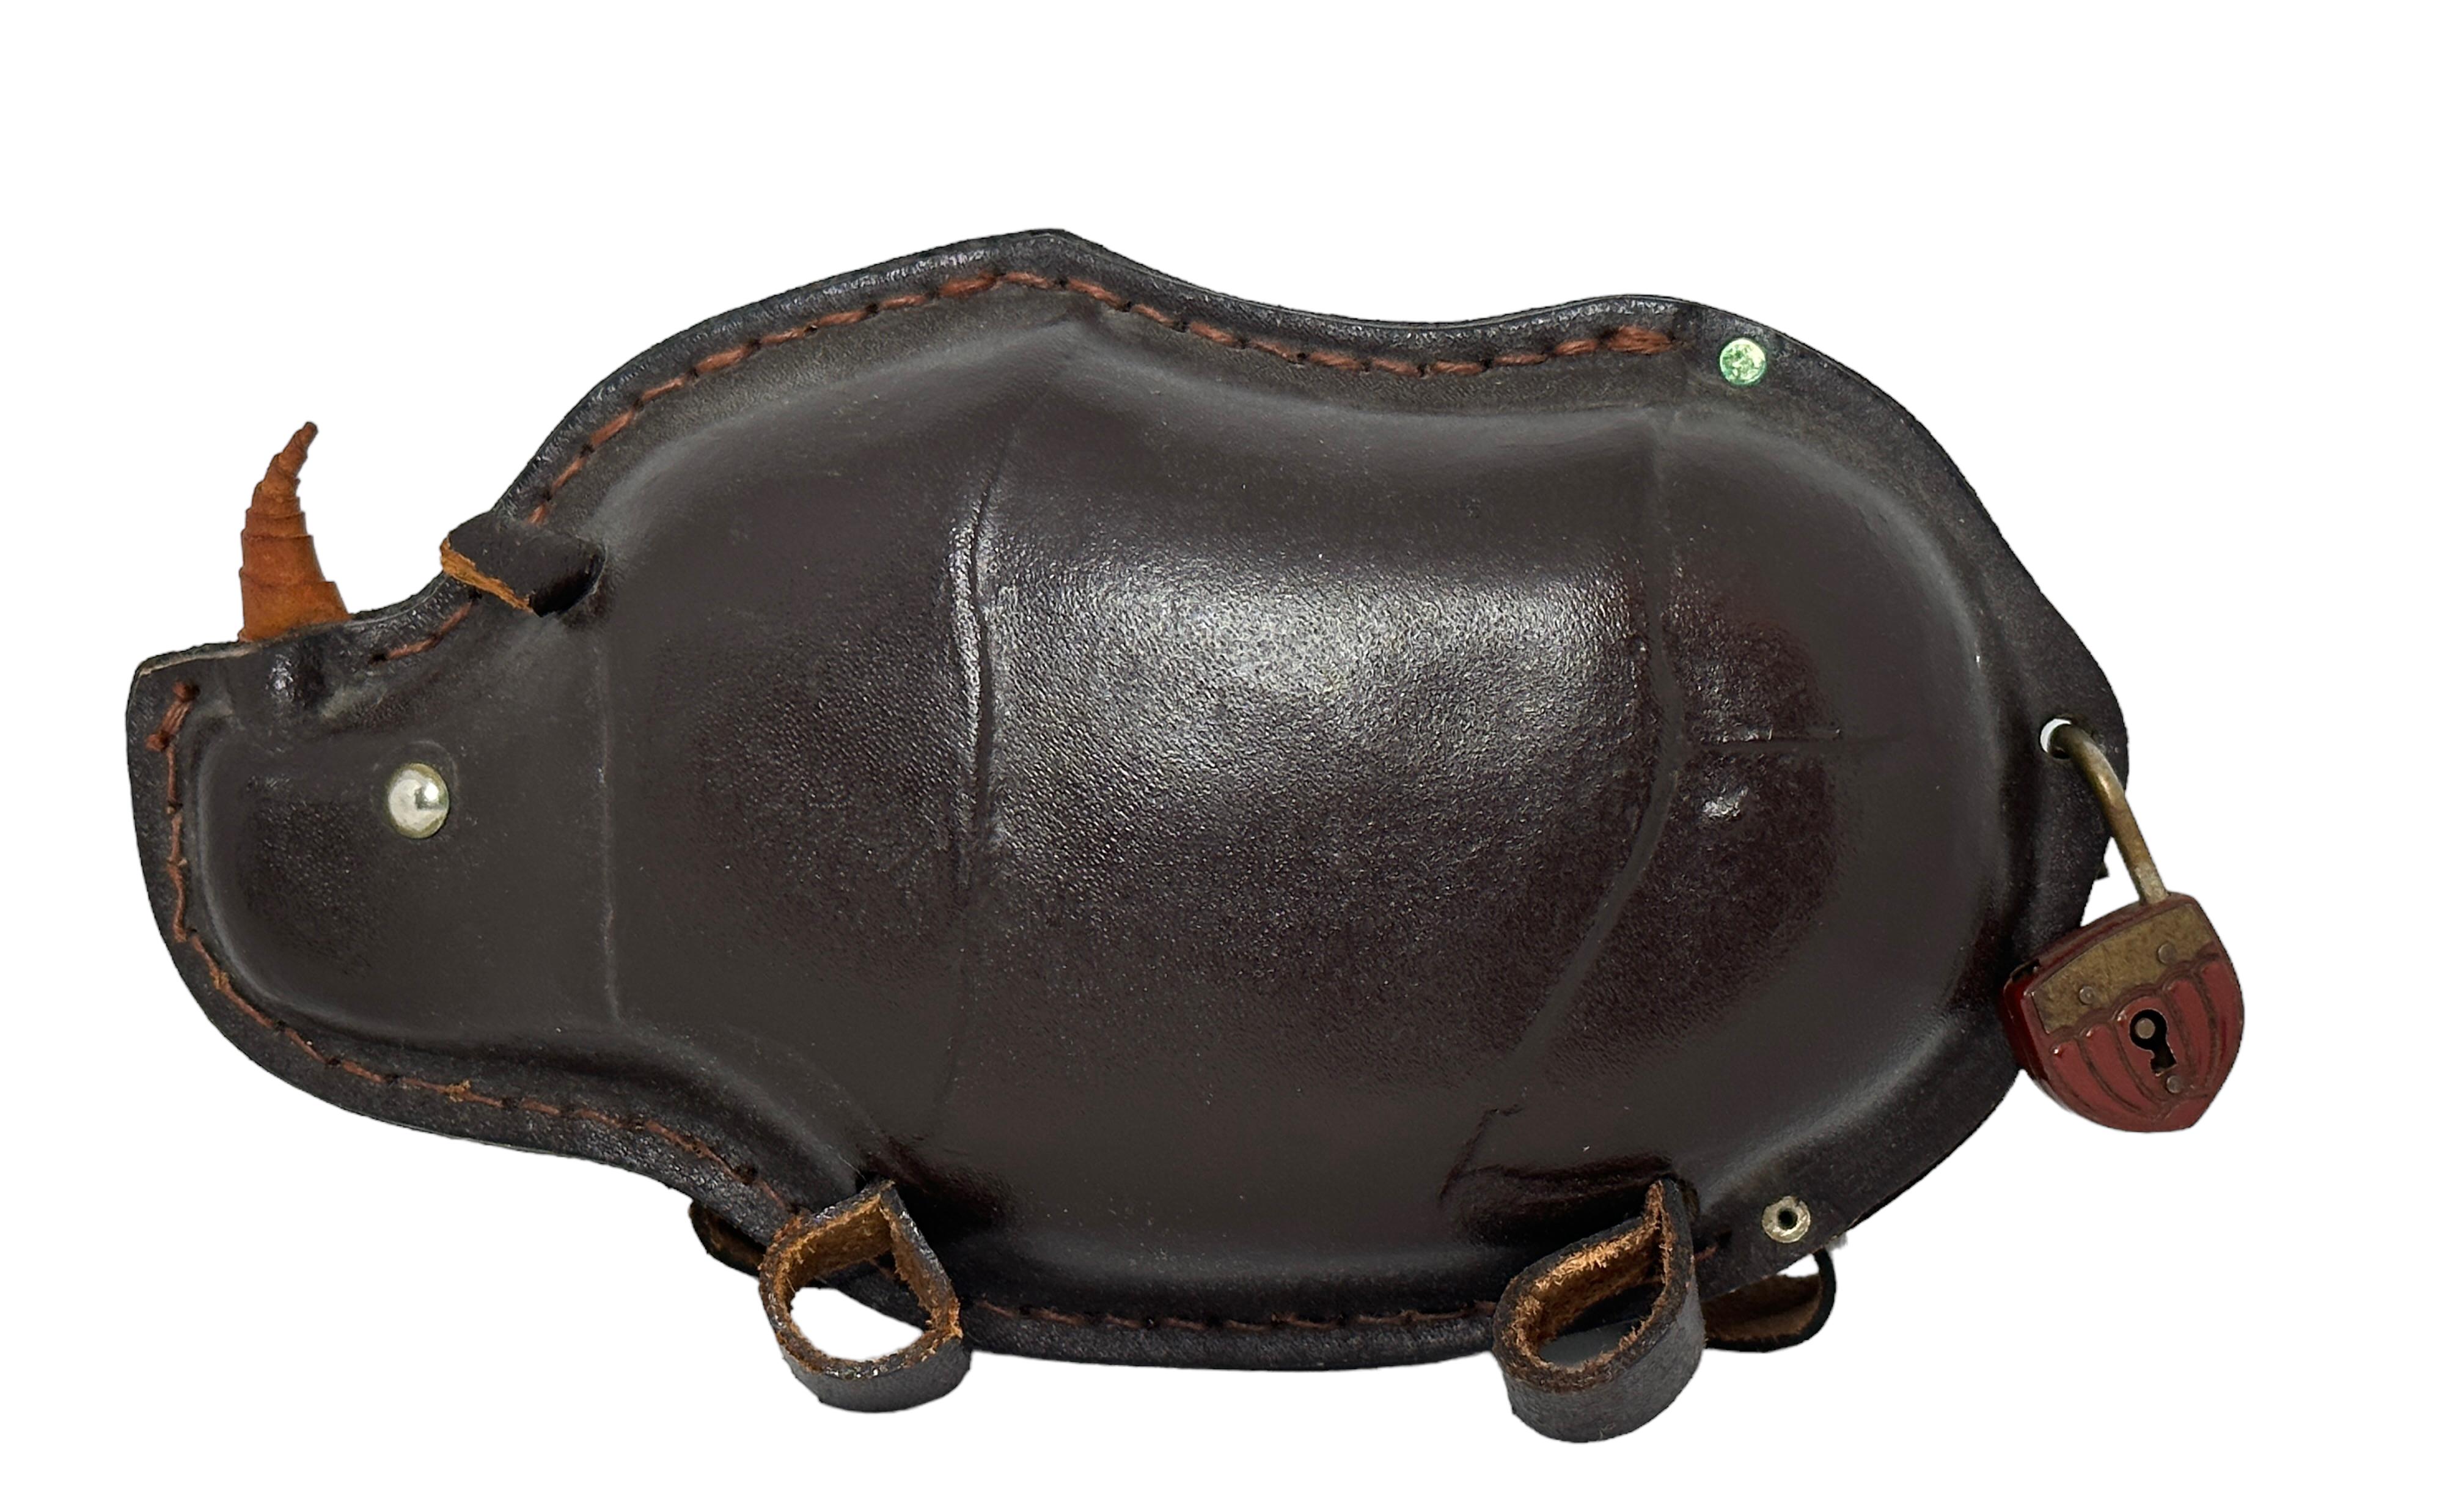 Gorgeous vintage leather made Rhino money bank. A beautiful decorative item in dark brown leather with a small metal lock. I am so sorry that the original old Key is missing. Made in Europe circa 1970s. Nice addition to any man cave, living room,